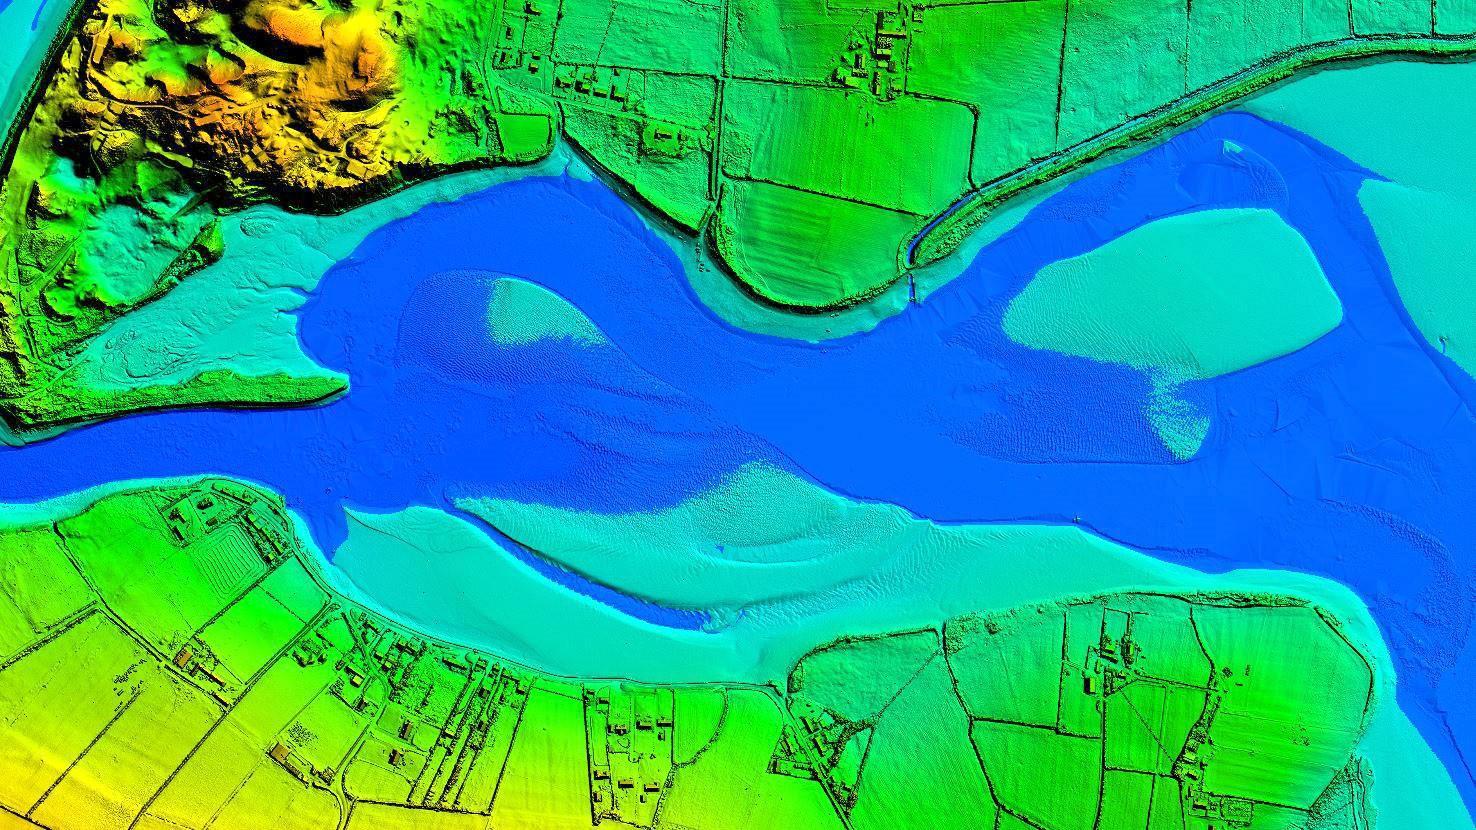 Image of an estuary in Ireland with high resolution LiDAR data clearly showing the water with the gradient of the surrounding land.